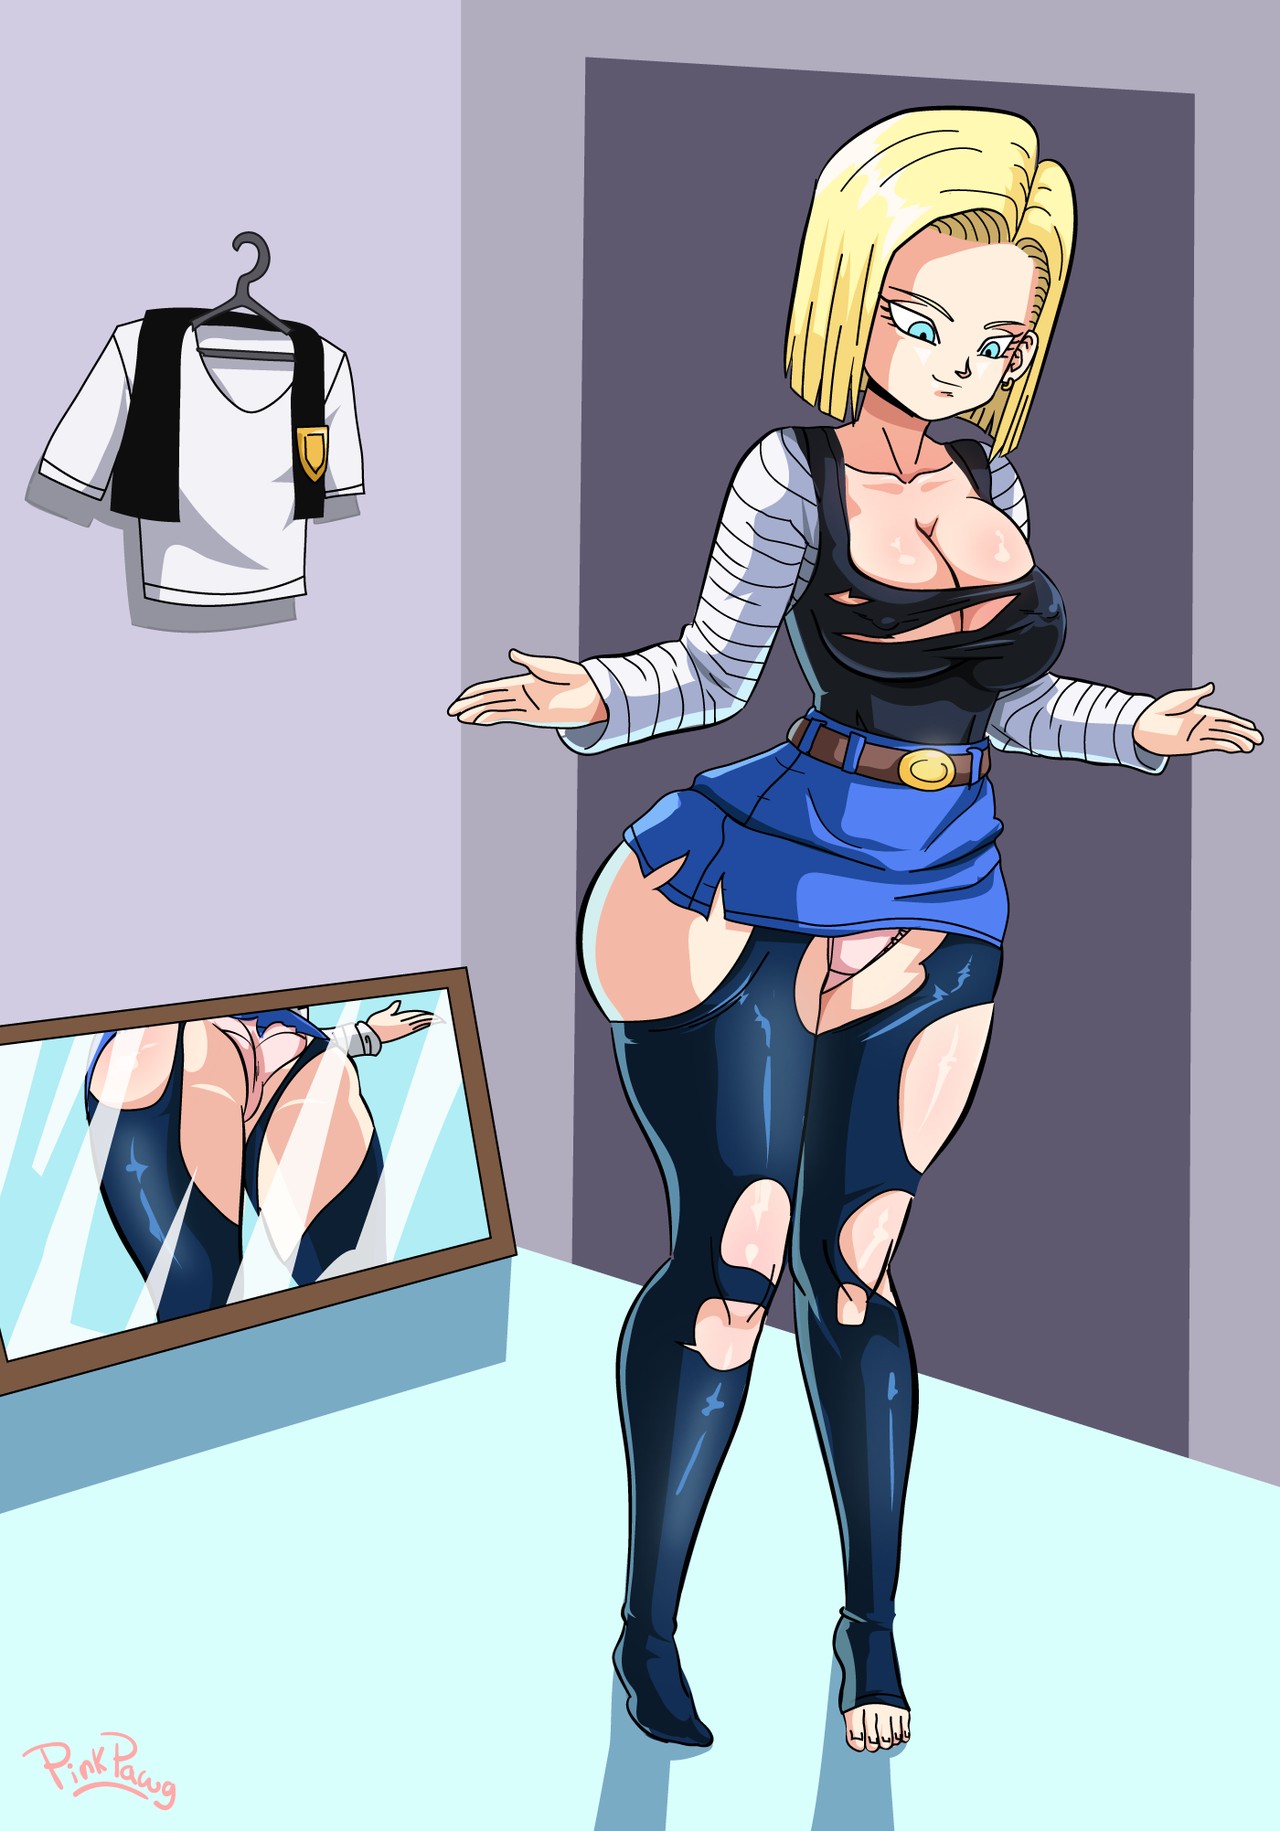 Android 18 meets Krillin Pink Pawg 01